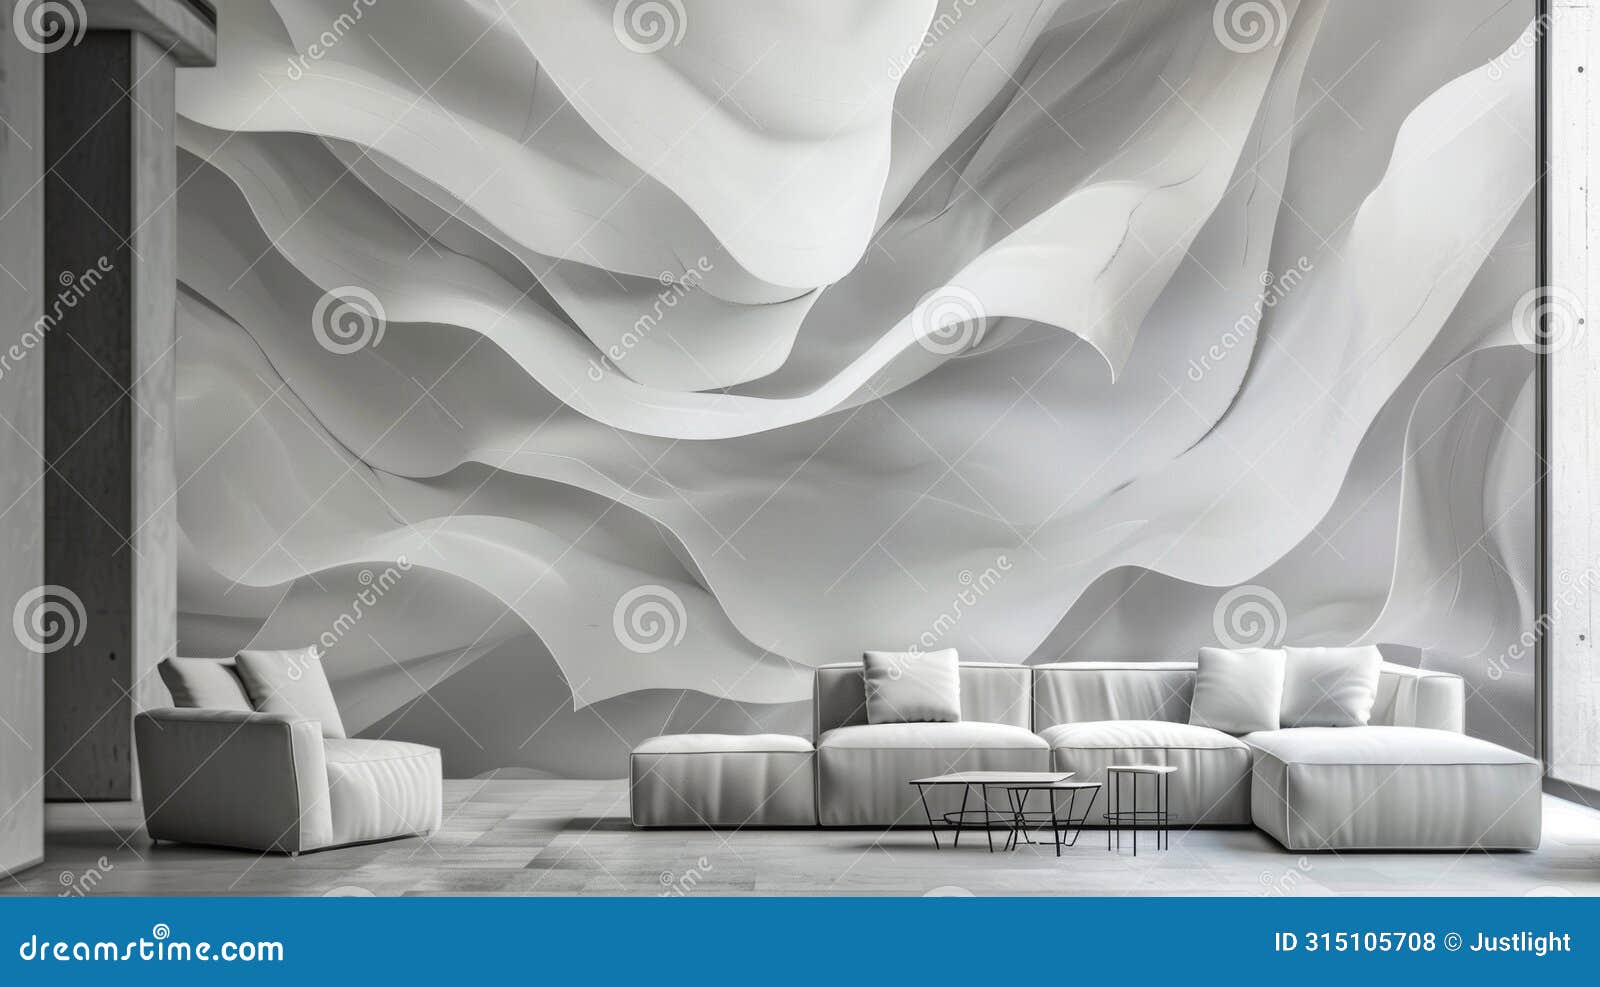 a monochromatic interior is brought to life with an abstract threedimensional wall mural. the mural depicts overlapping